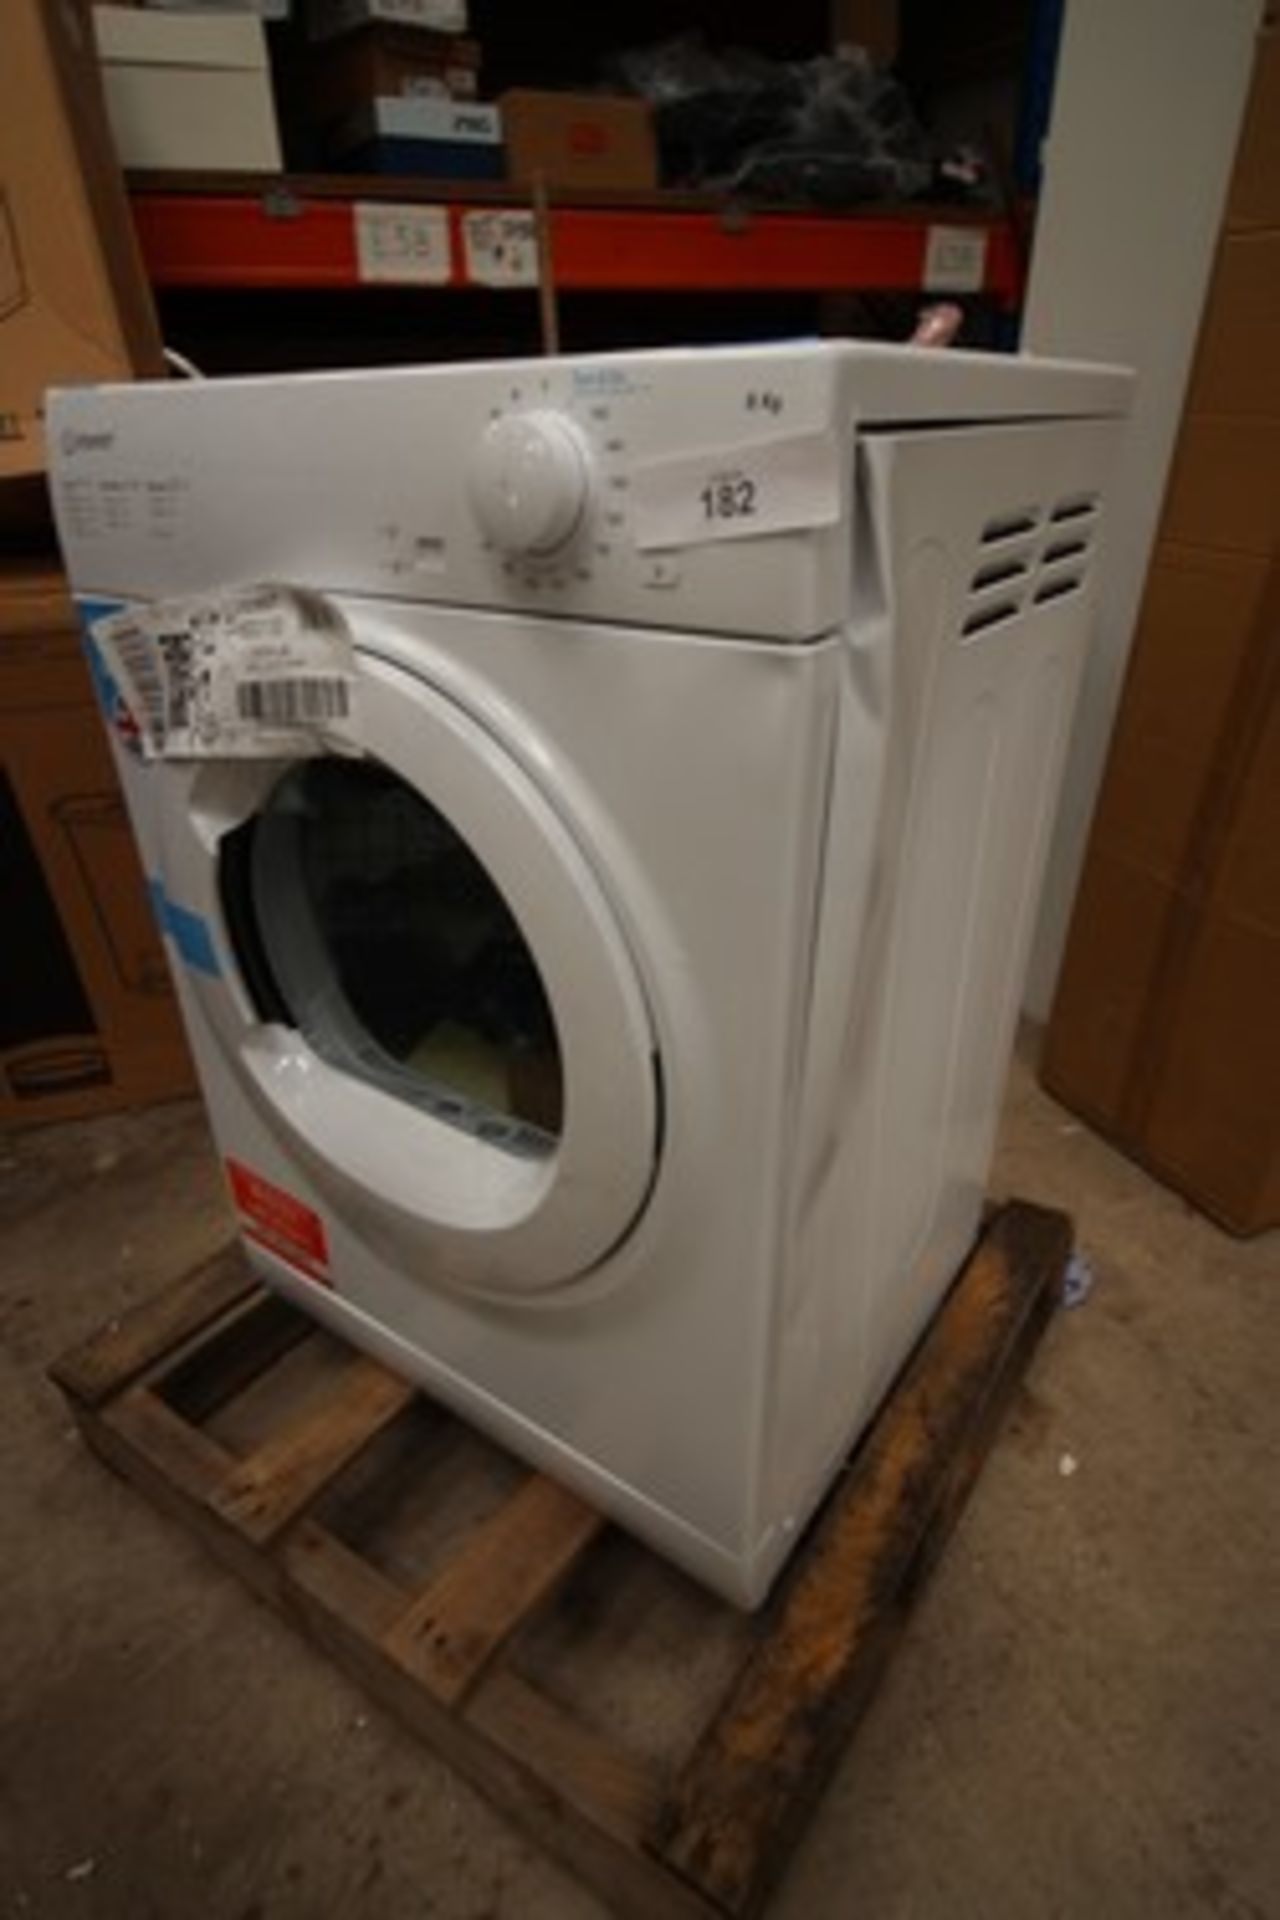 1 x Indesit 8kg tumble dryer, Model 1632130, dented right hand side panel - New (eBay 7)